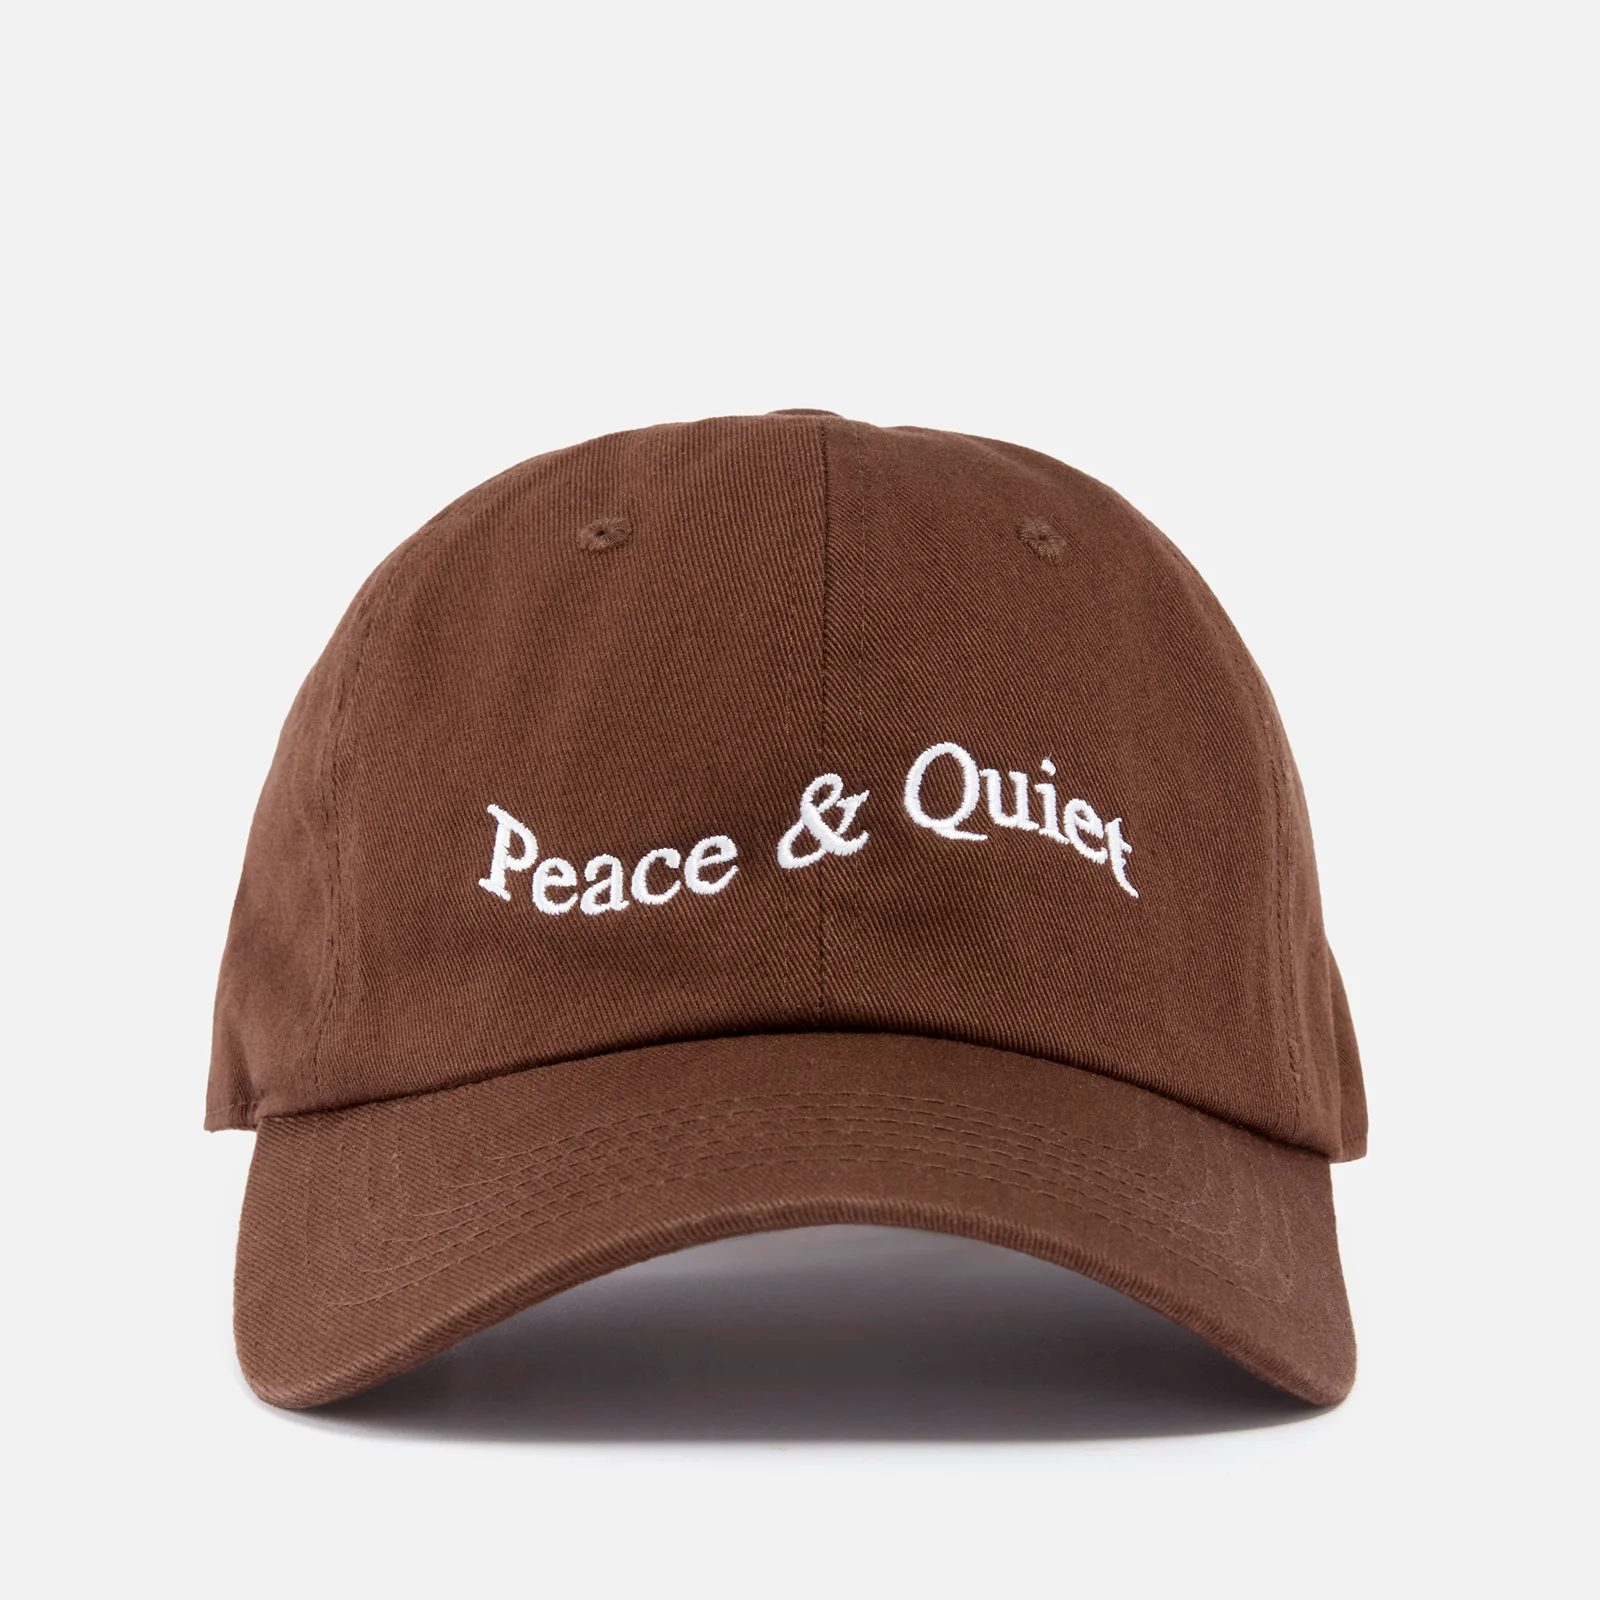 Museum of Peace and Quiet Wordmark Cotton-Twill Cap Image 1